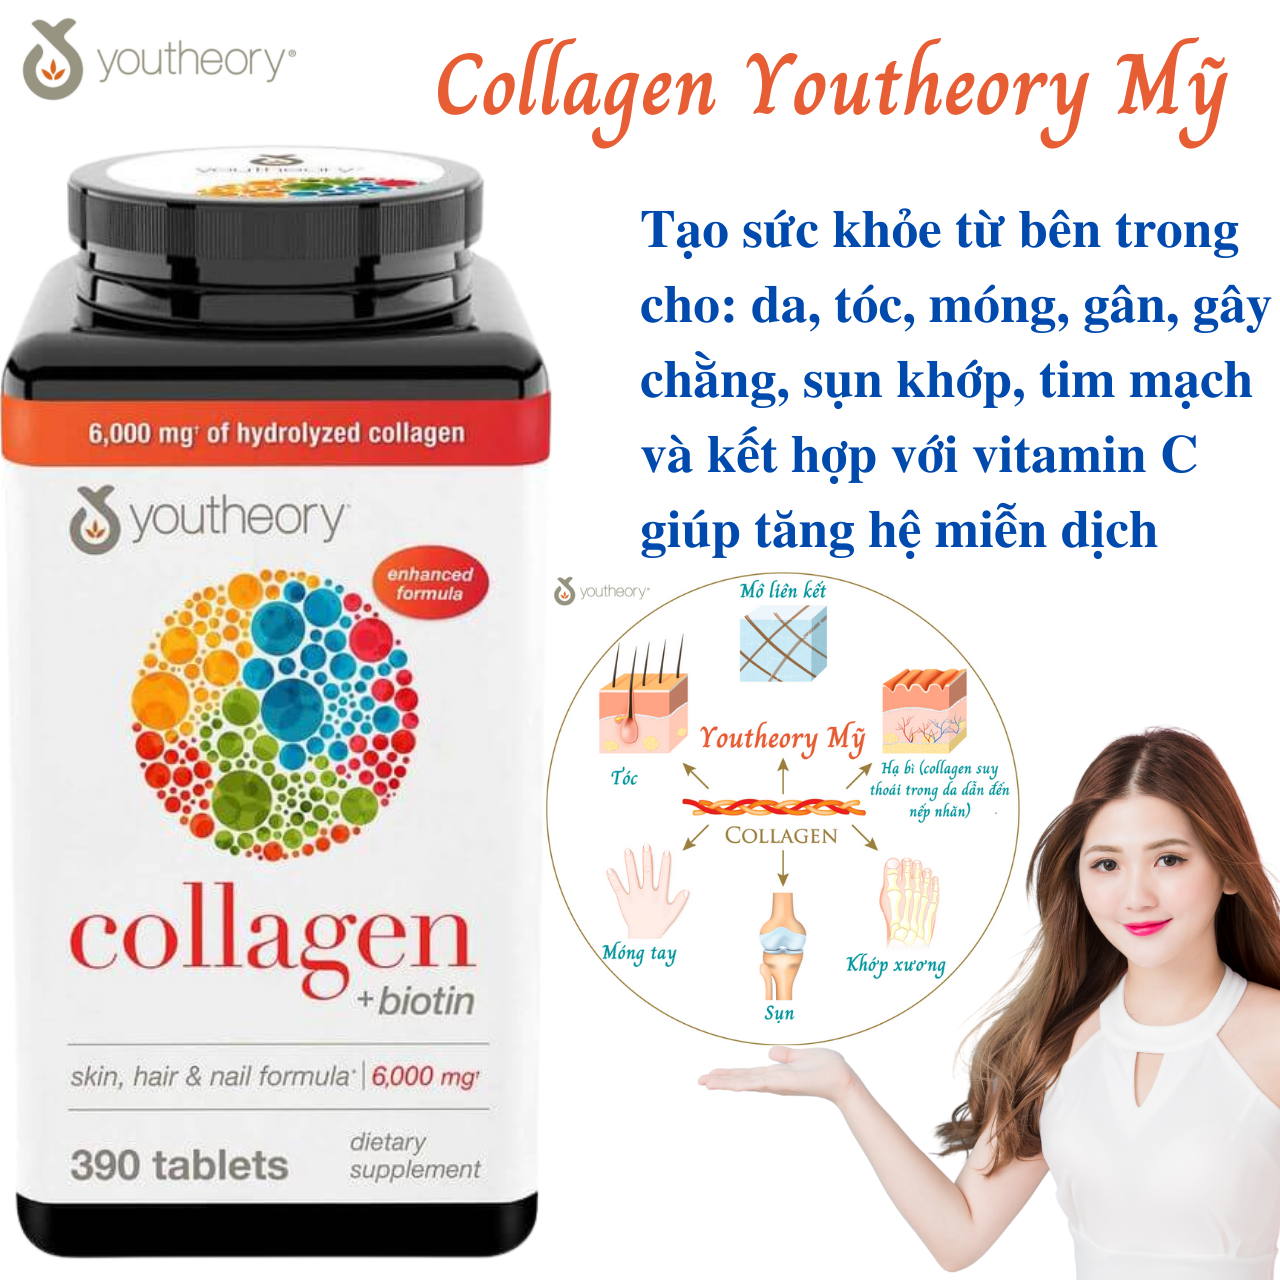 Collagen Youtheory Mỹ